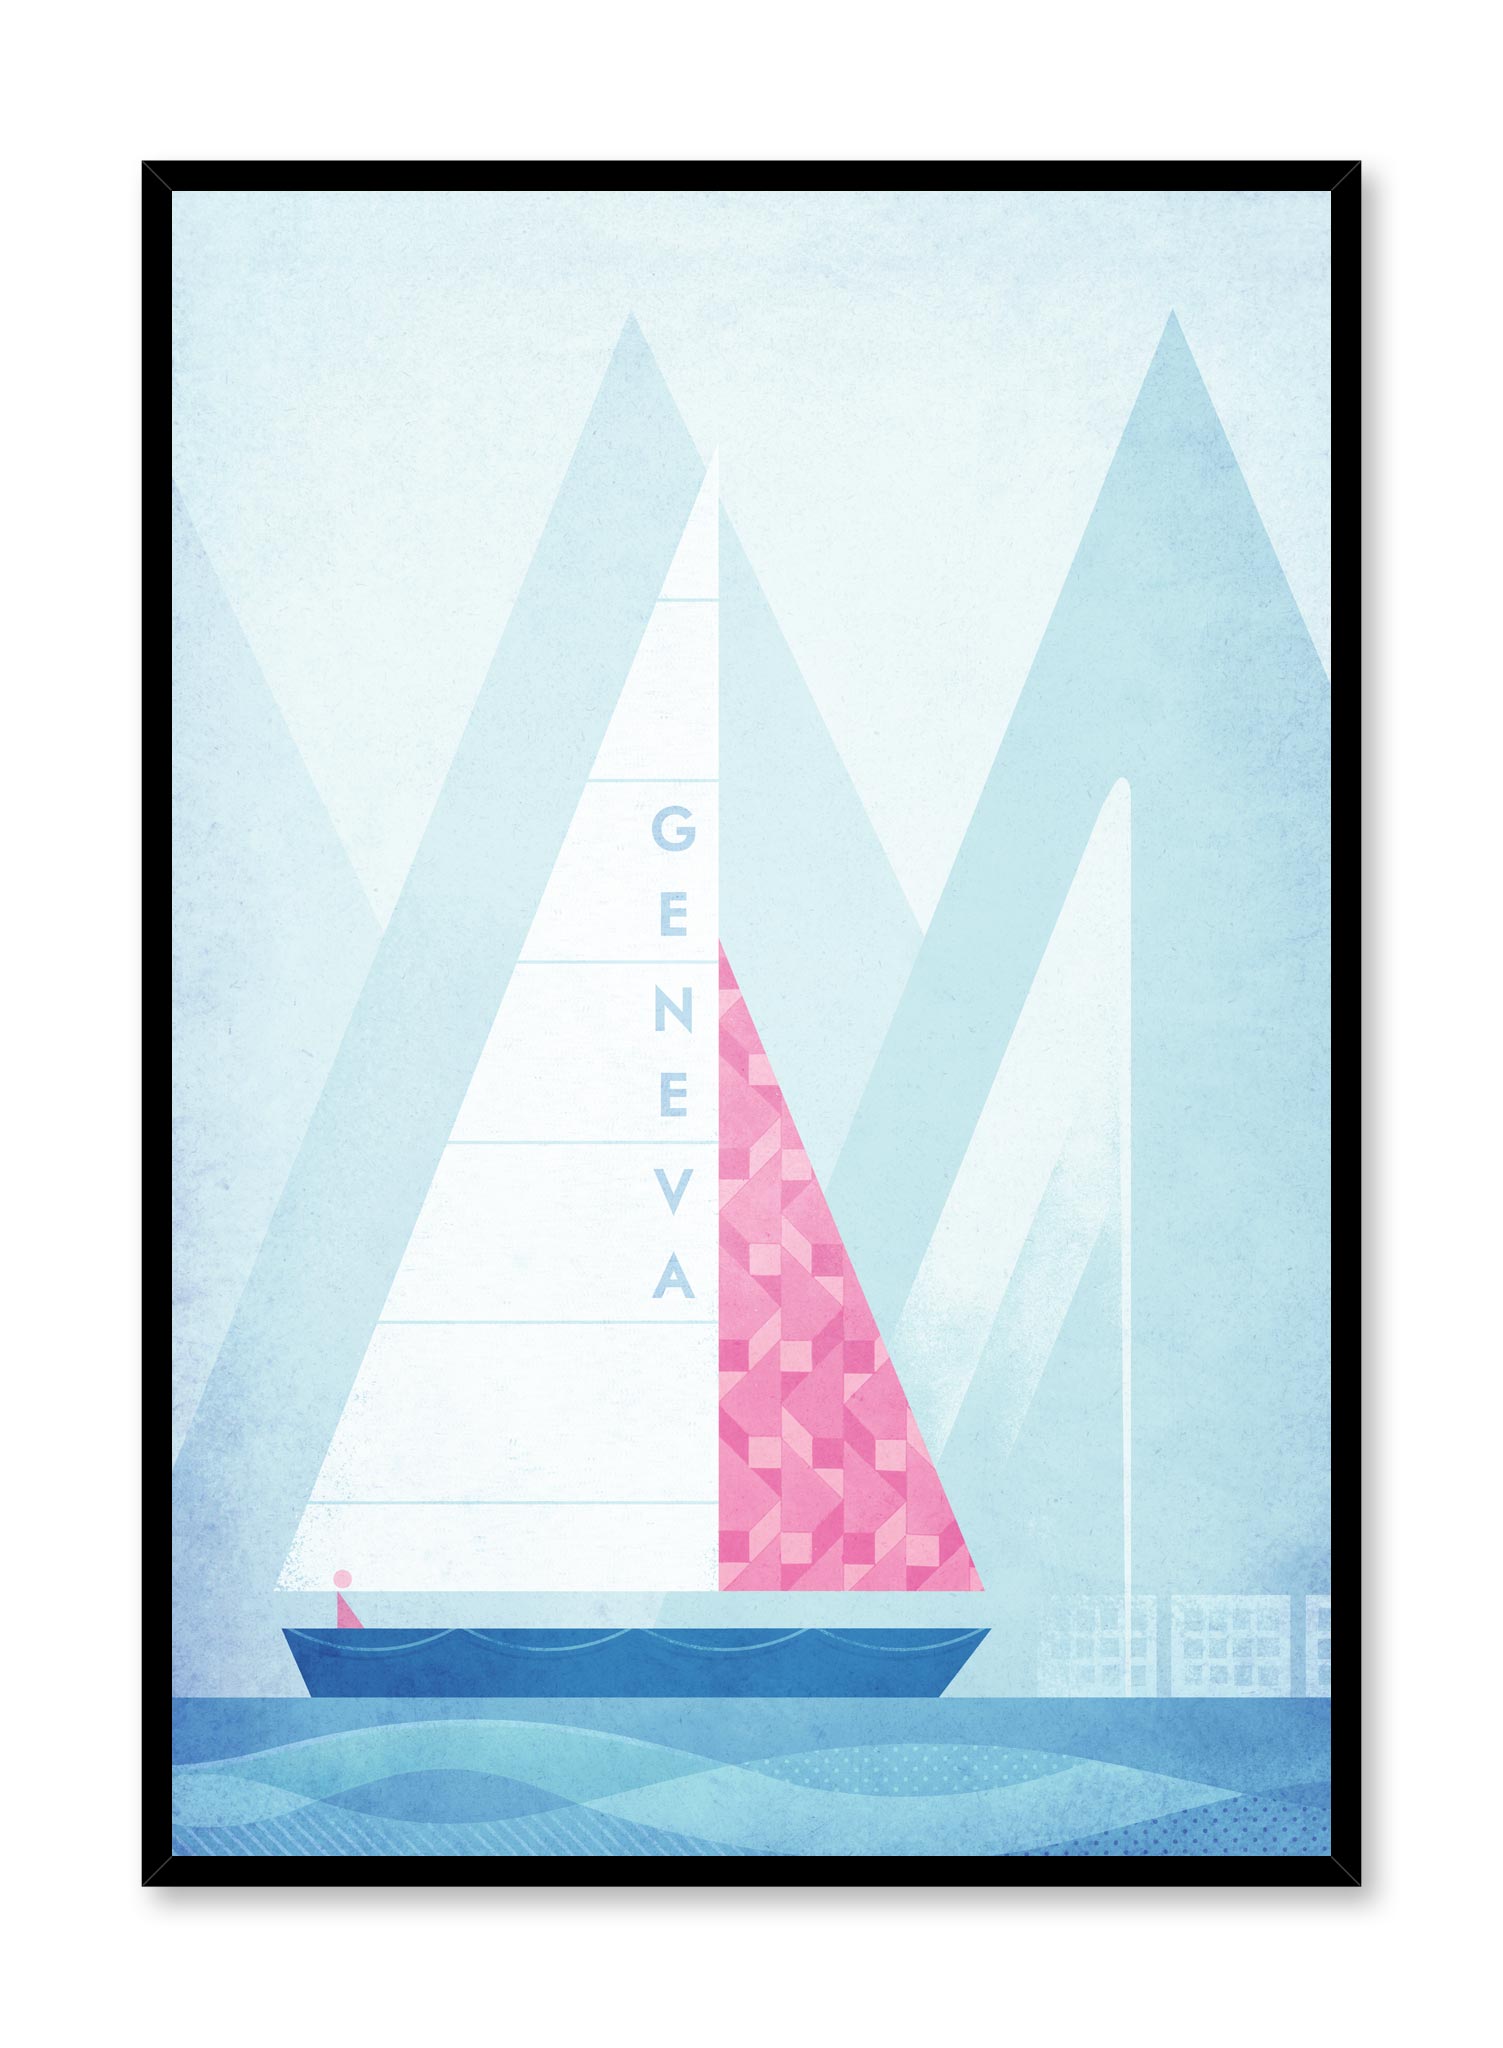 Modern minimalist travel poster by Opposite Wall with illustration of Geneva